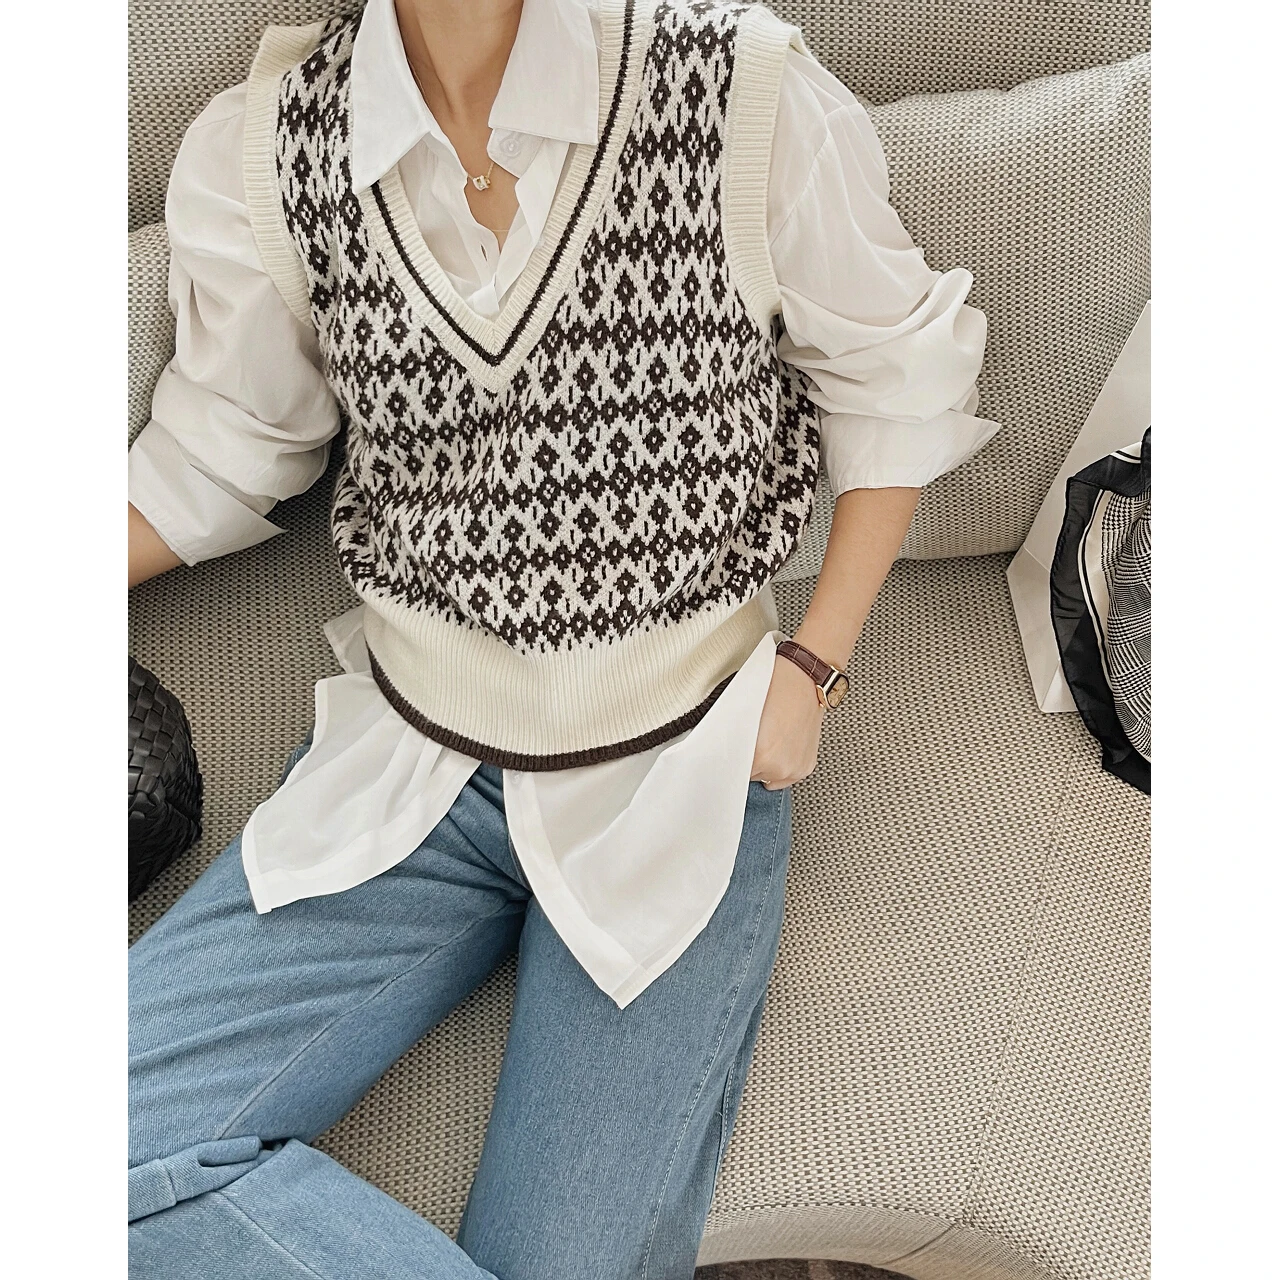   Za Woman Oem Vests Pullover Y2k Clothes Sleeveless Top Knit New Waistc... - $163.15